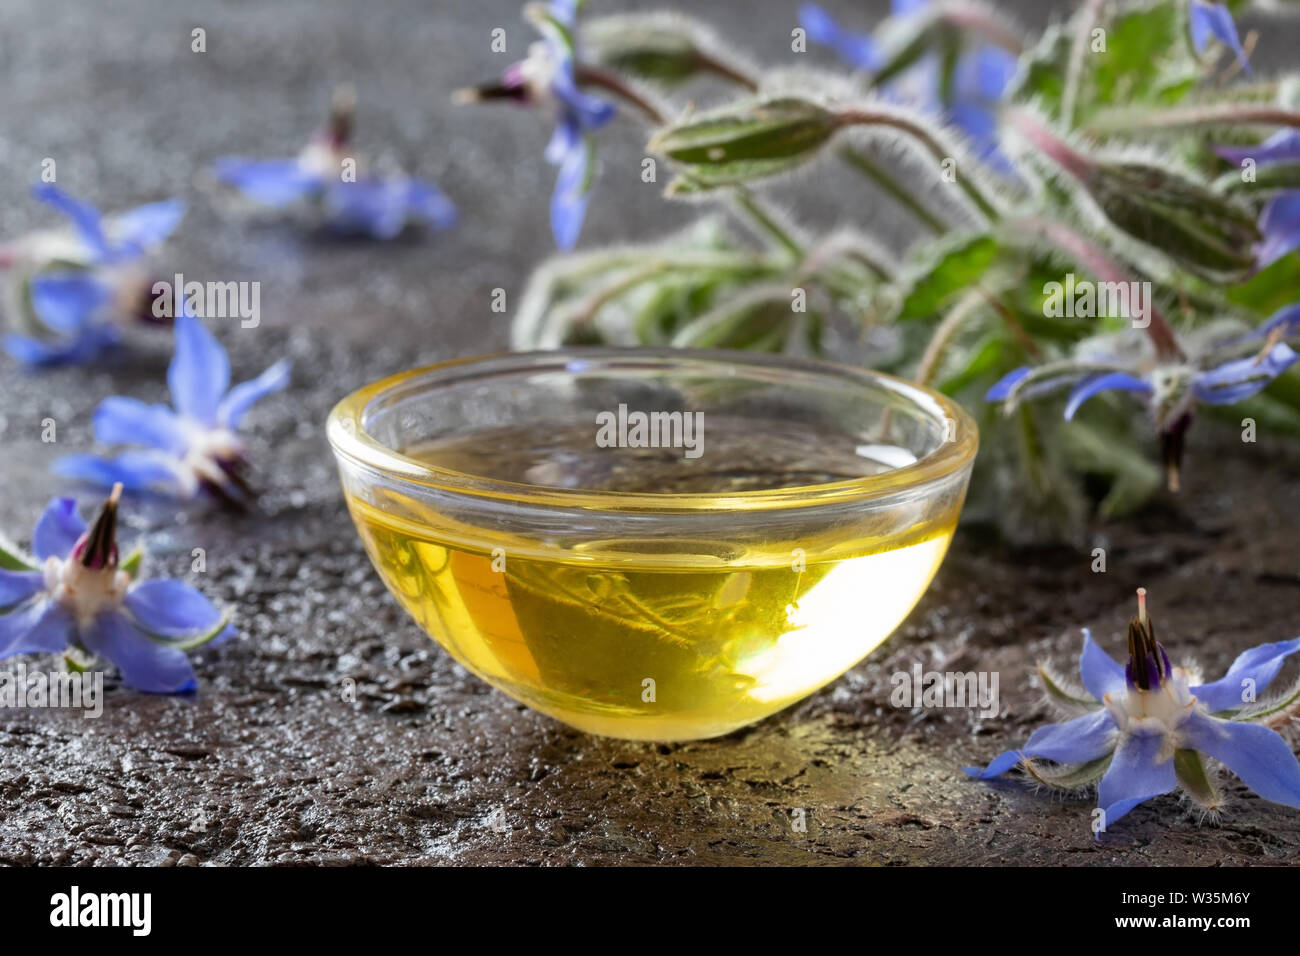 A bowl of borage oil with blooming plant on a dark background Stock Photo